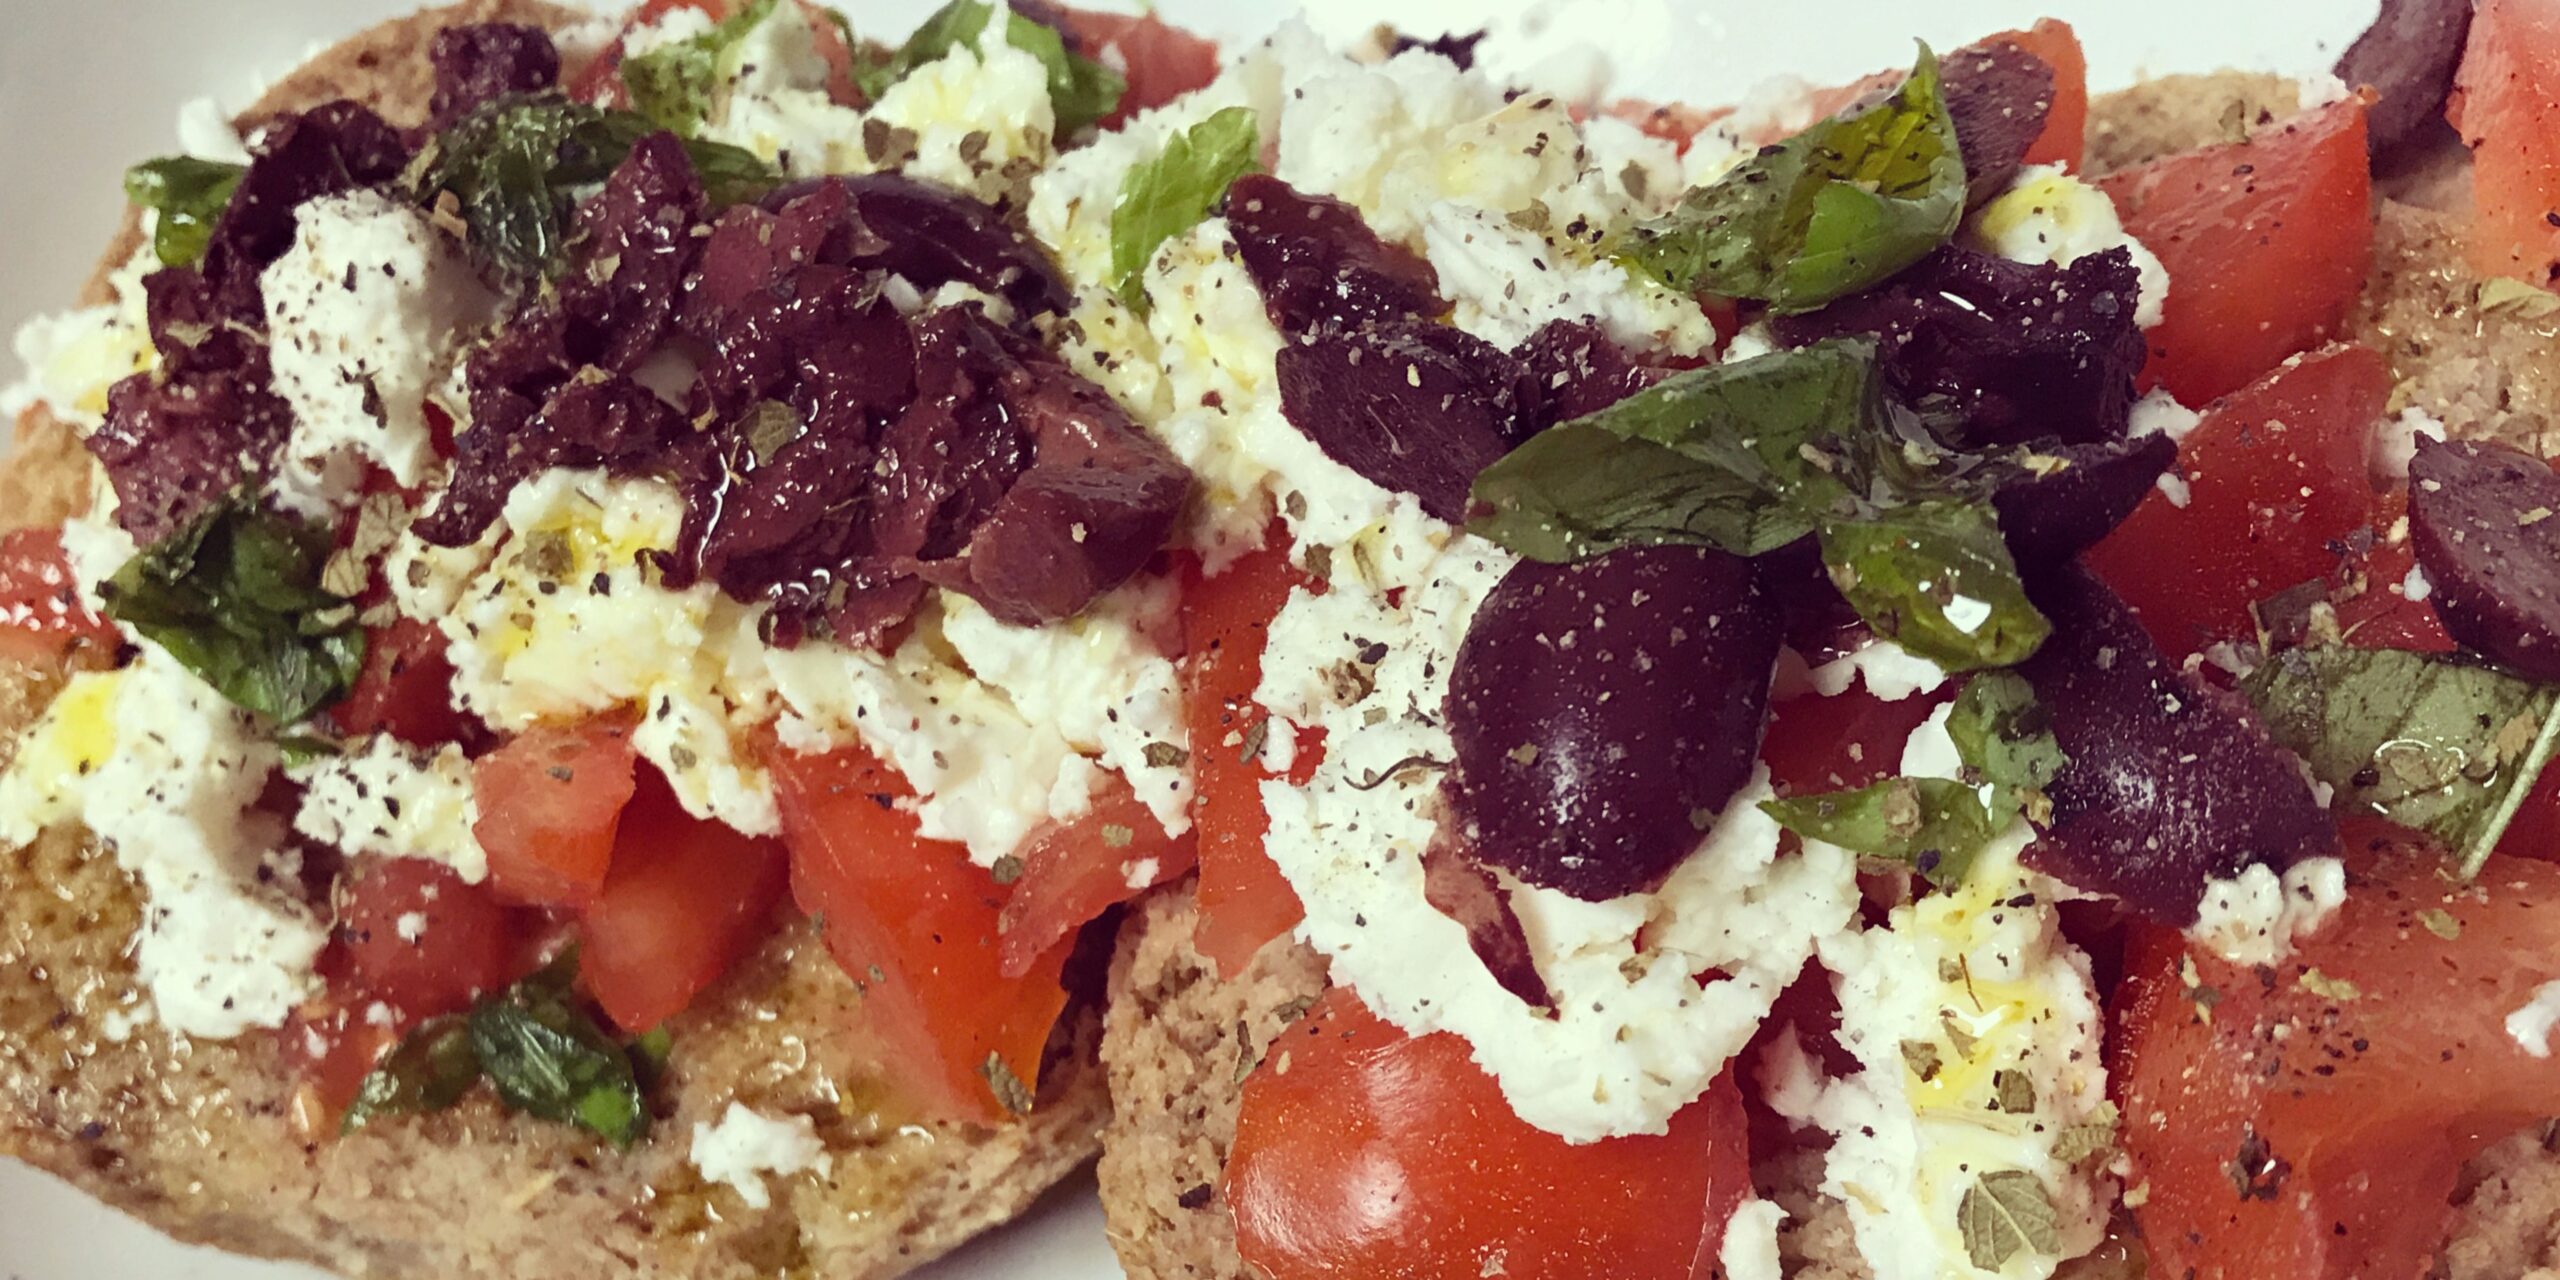 Open-faced sandwich topped with tomatoes, cheese, olives, and herbs on a plate.